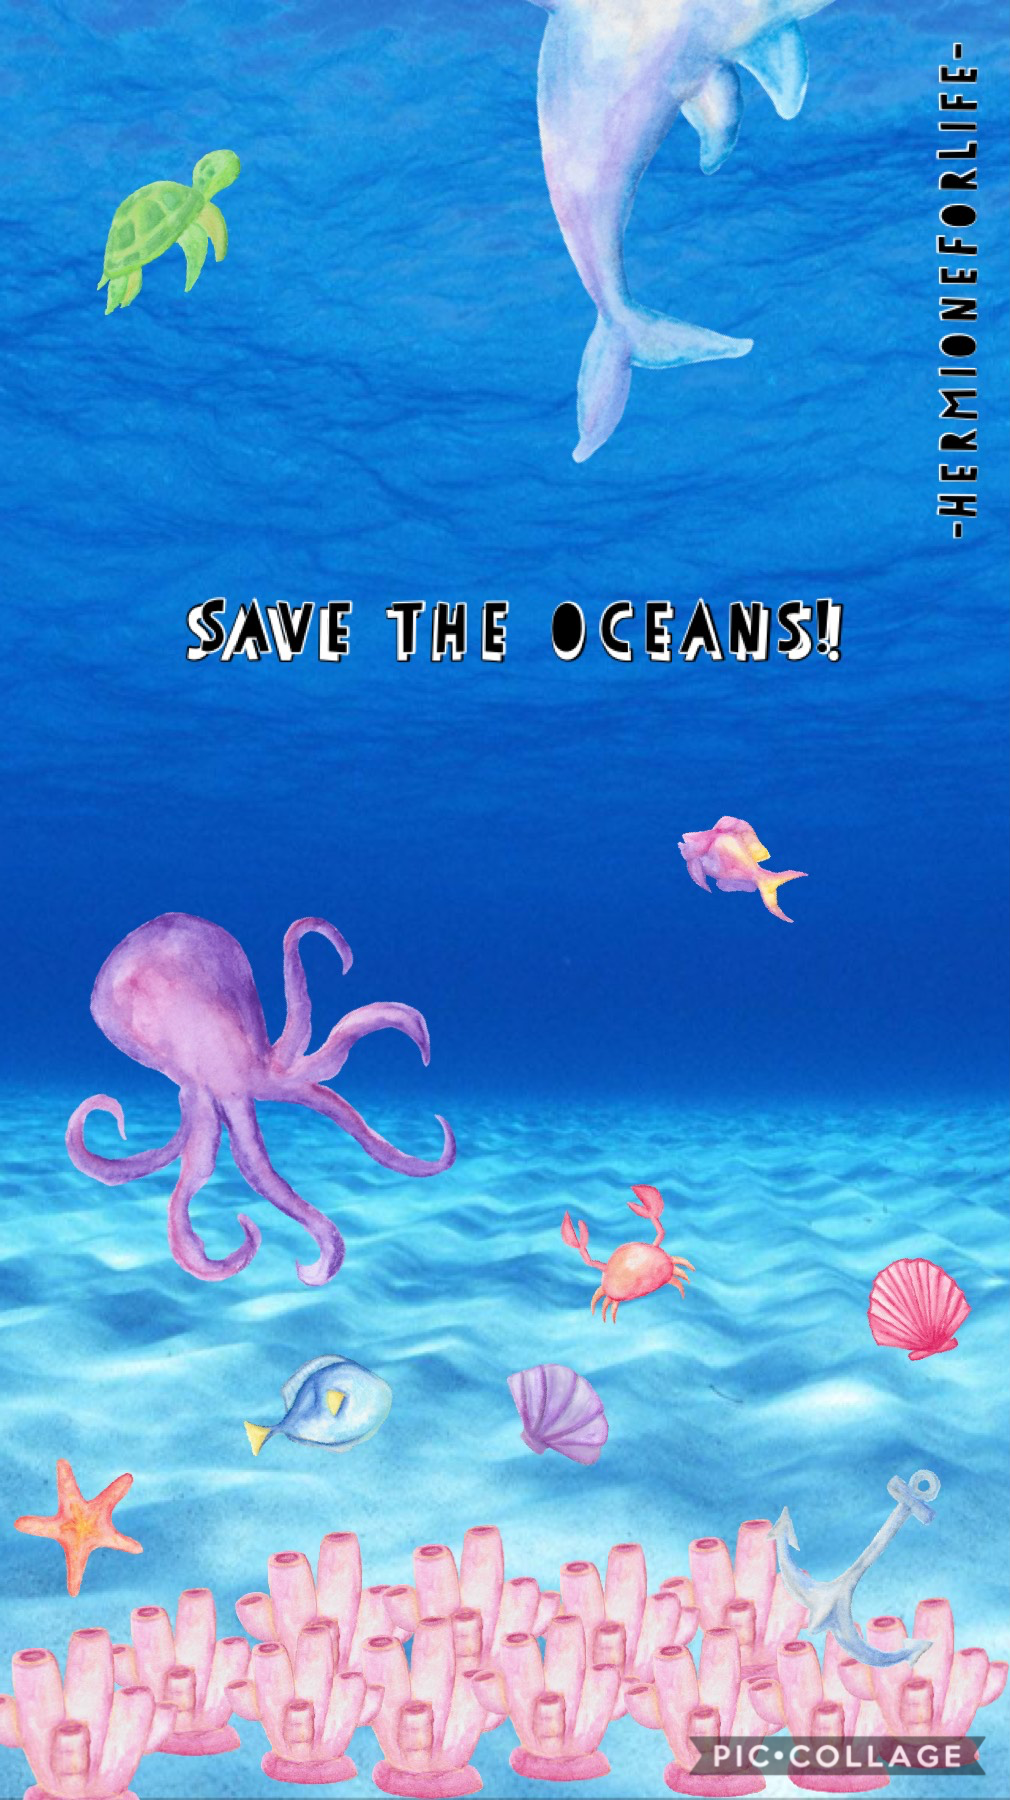 The oceans need help! Do your part in making them last a little longer.